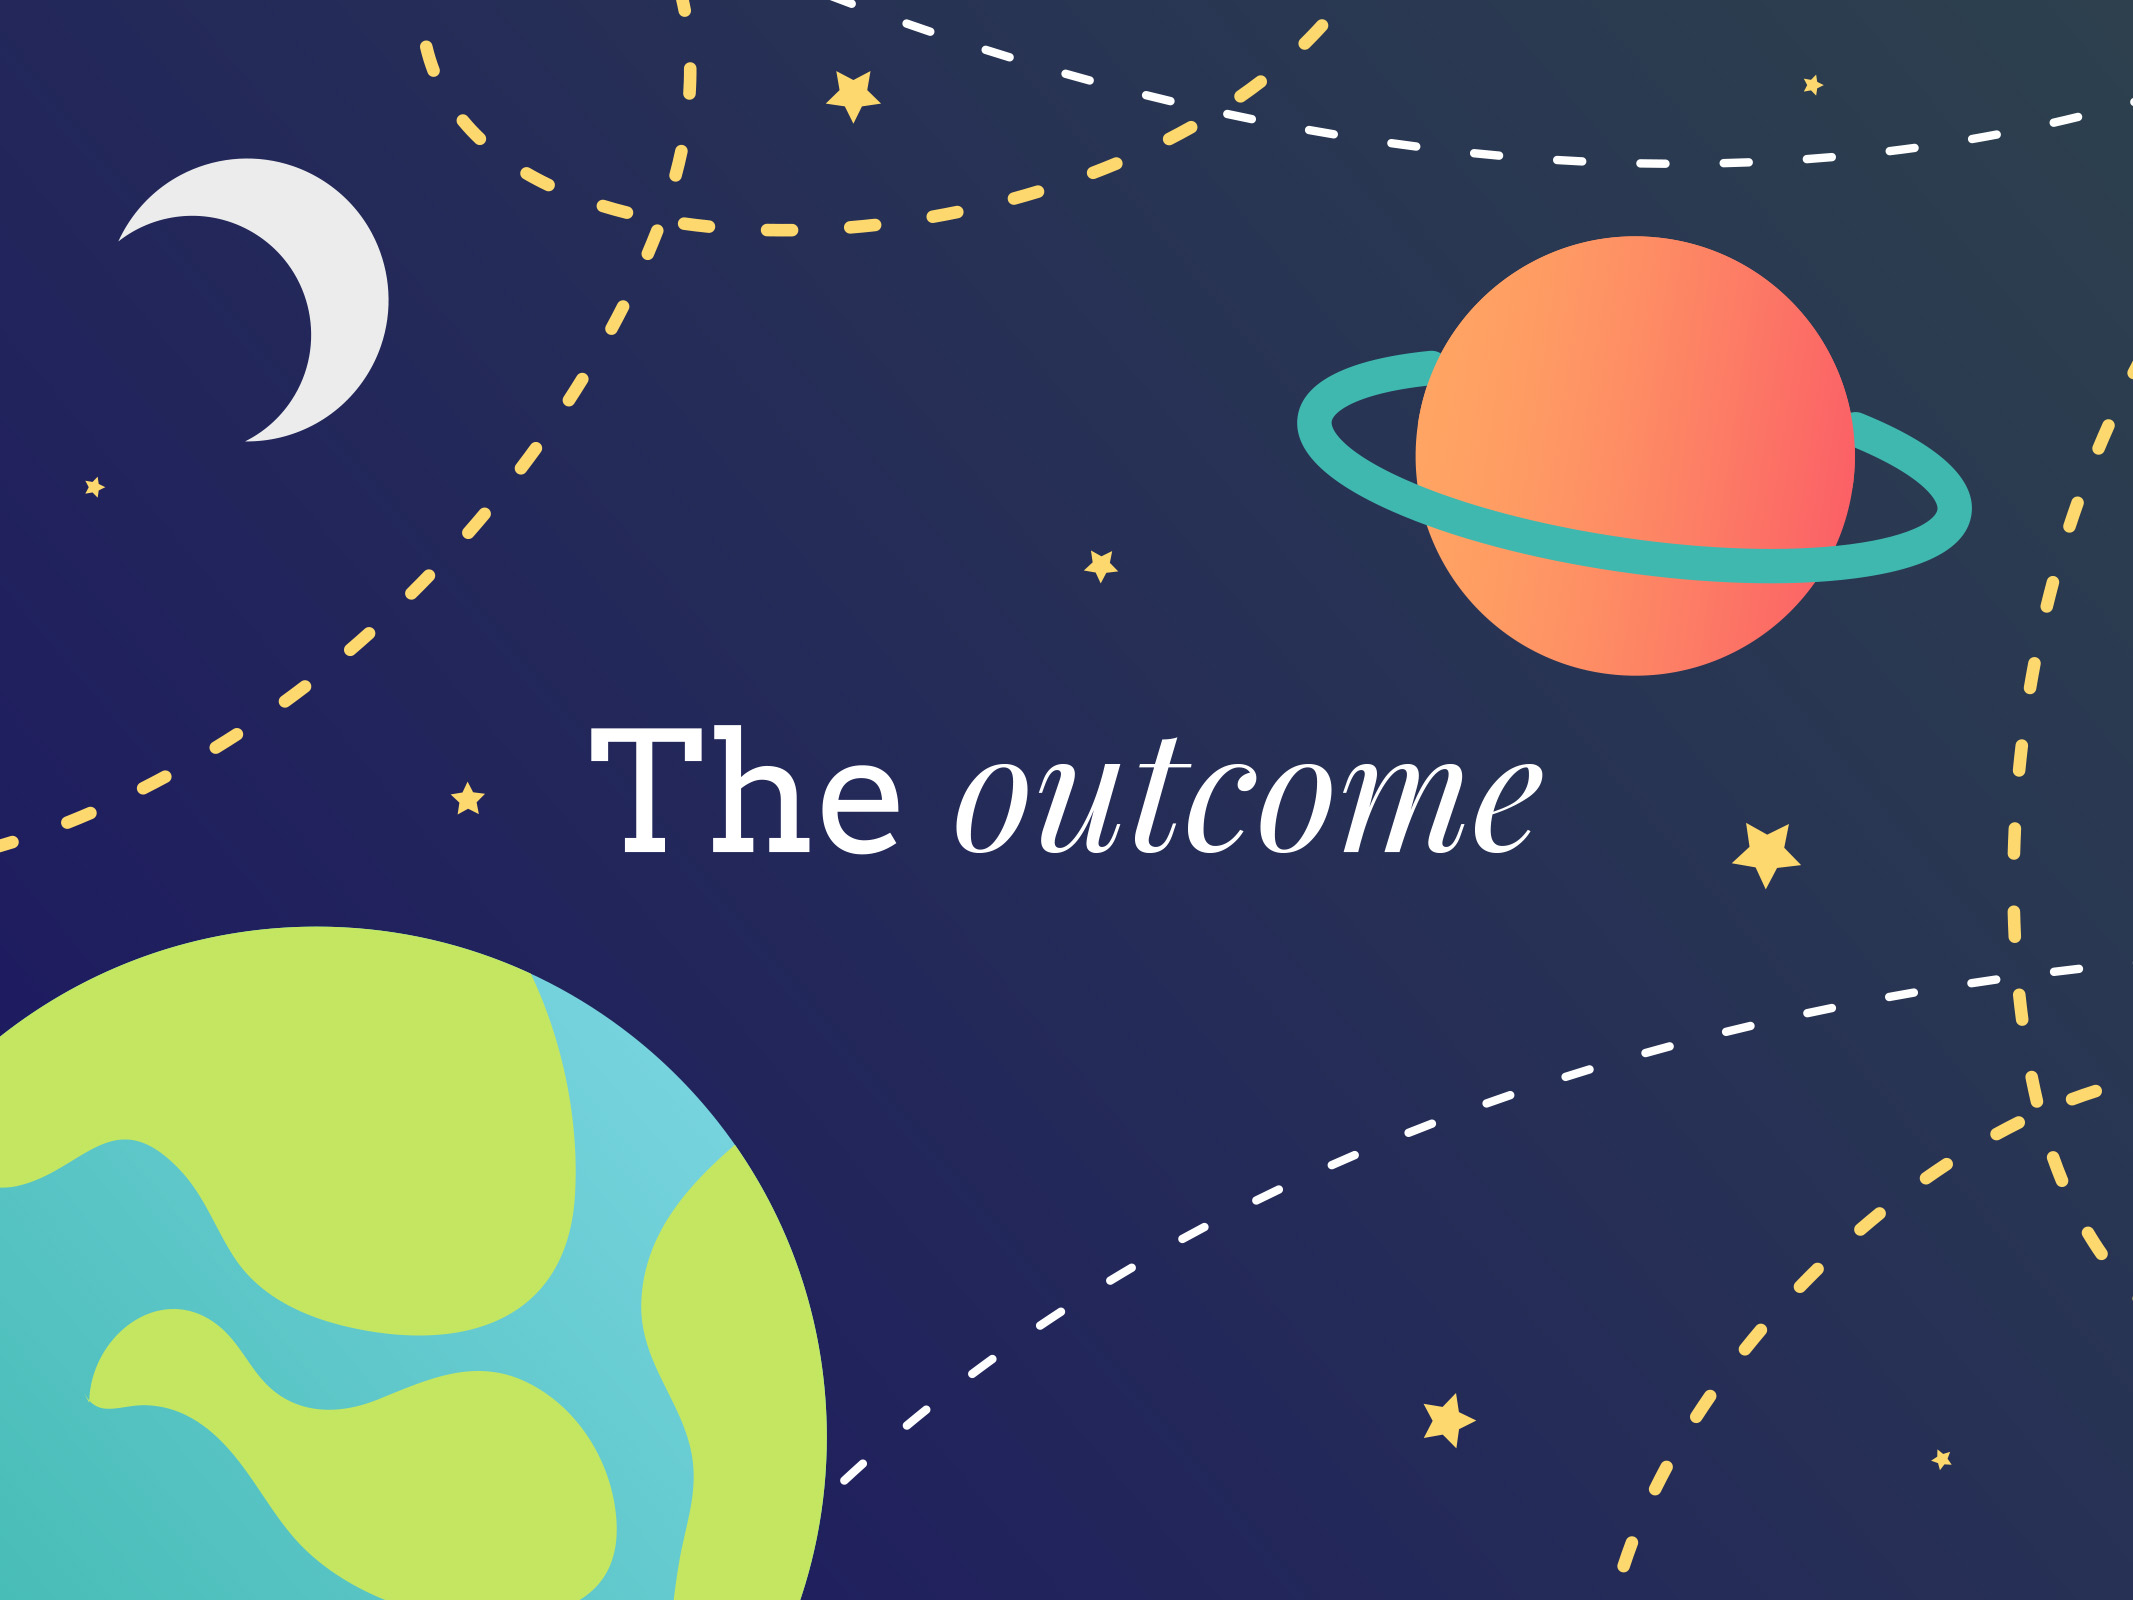 Vector illustration features a celestial scene with a dark blue sky, a silver crescent moon and gold stars. Planet Earth is in the bottom left, and a Saturn-style planet is in the top right. The imagery symbolises the transformative nature of mentoring. The image includes the words 'The outcome' in white text.